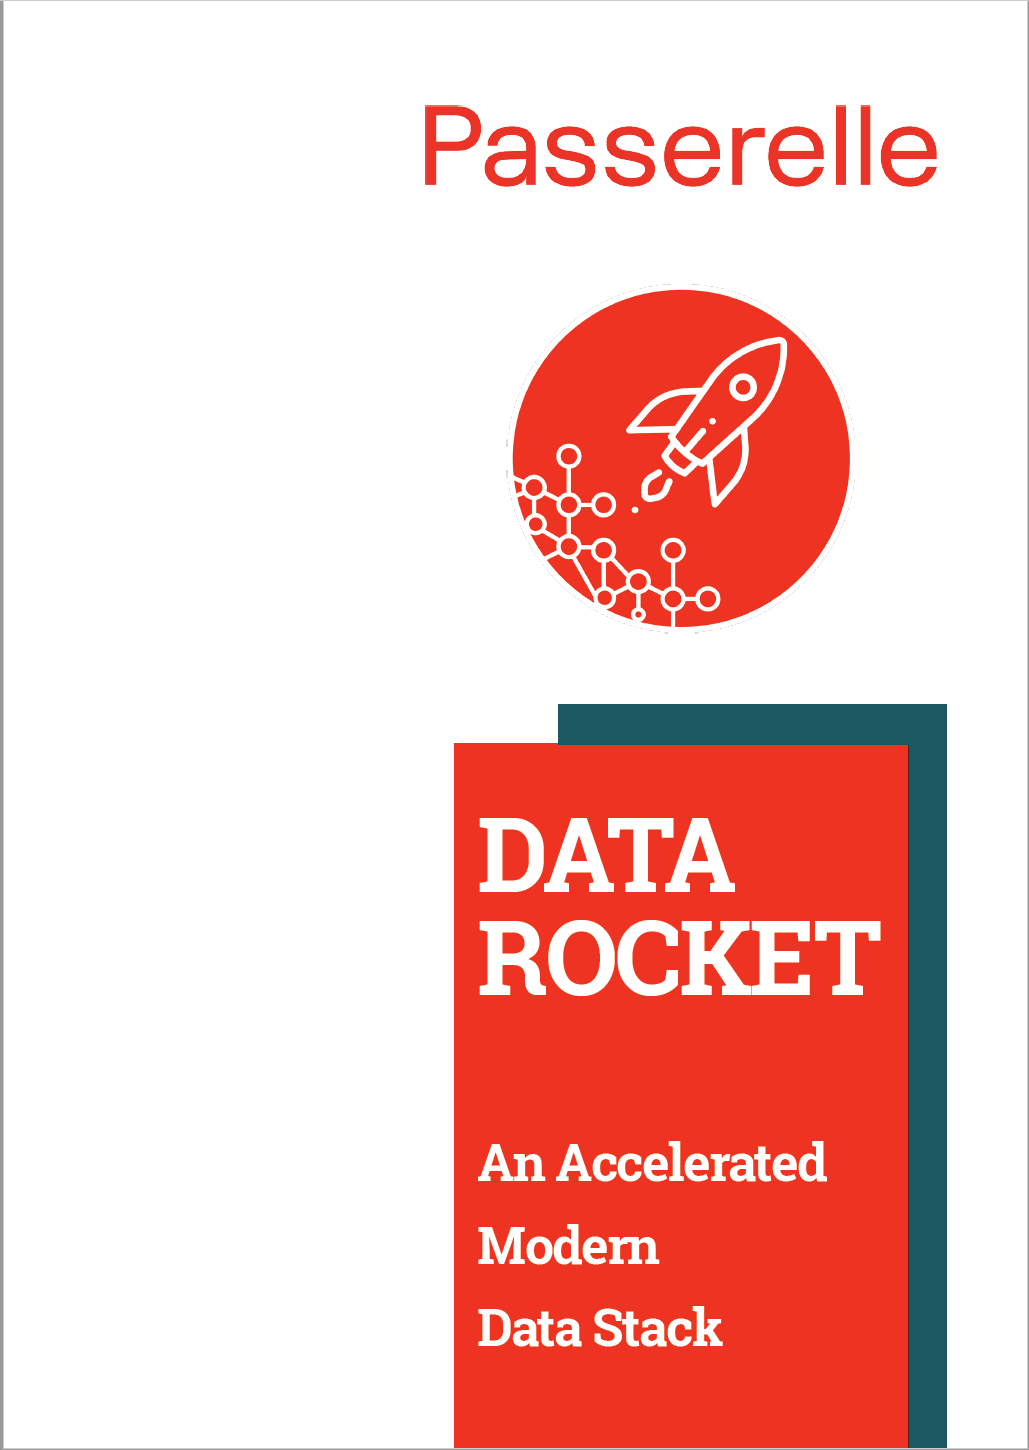 Data Rocket Front page